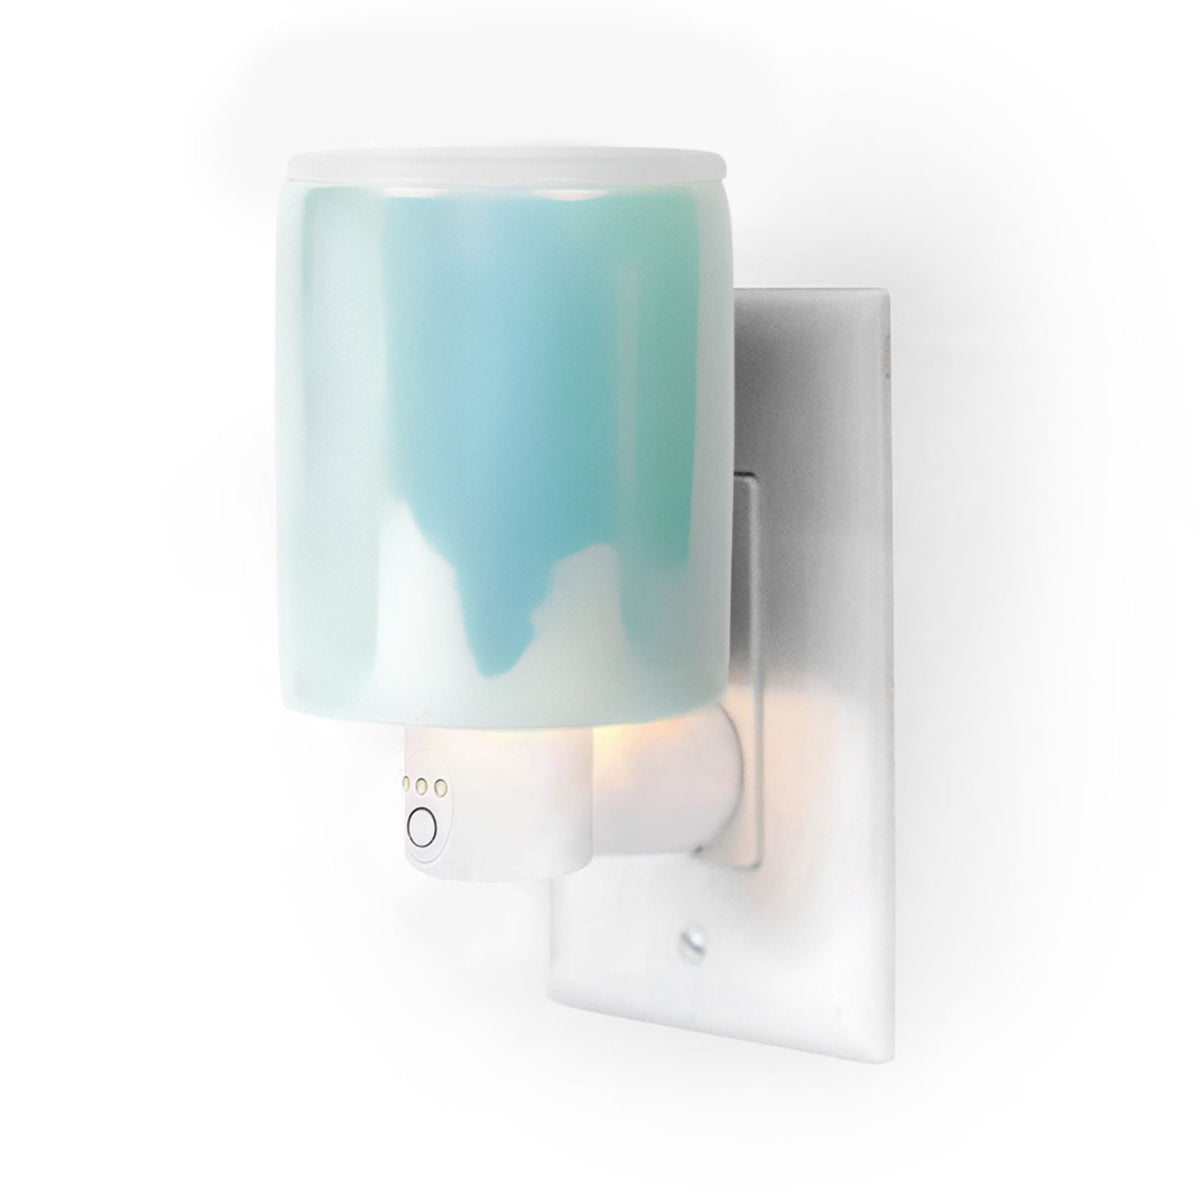 Iridescent Outlet Timer Wax Warmers